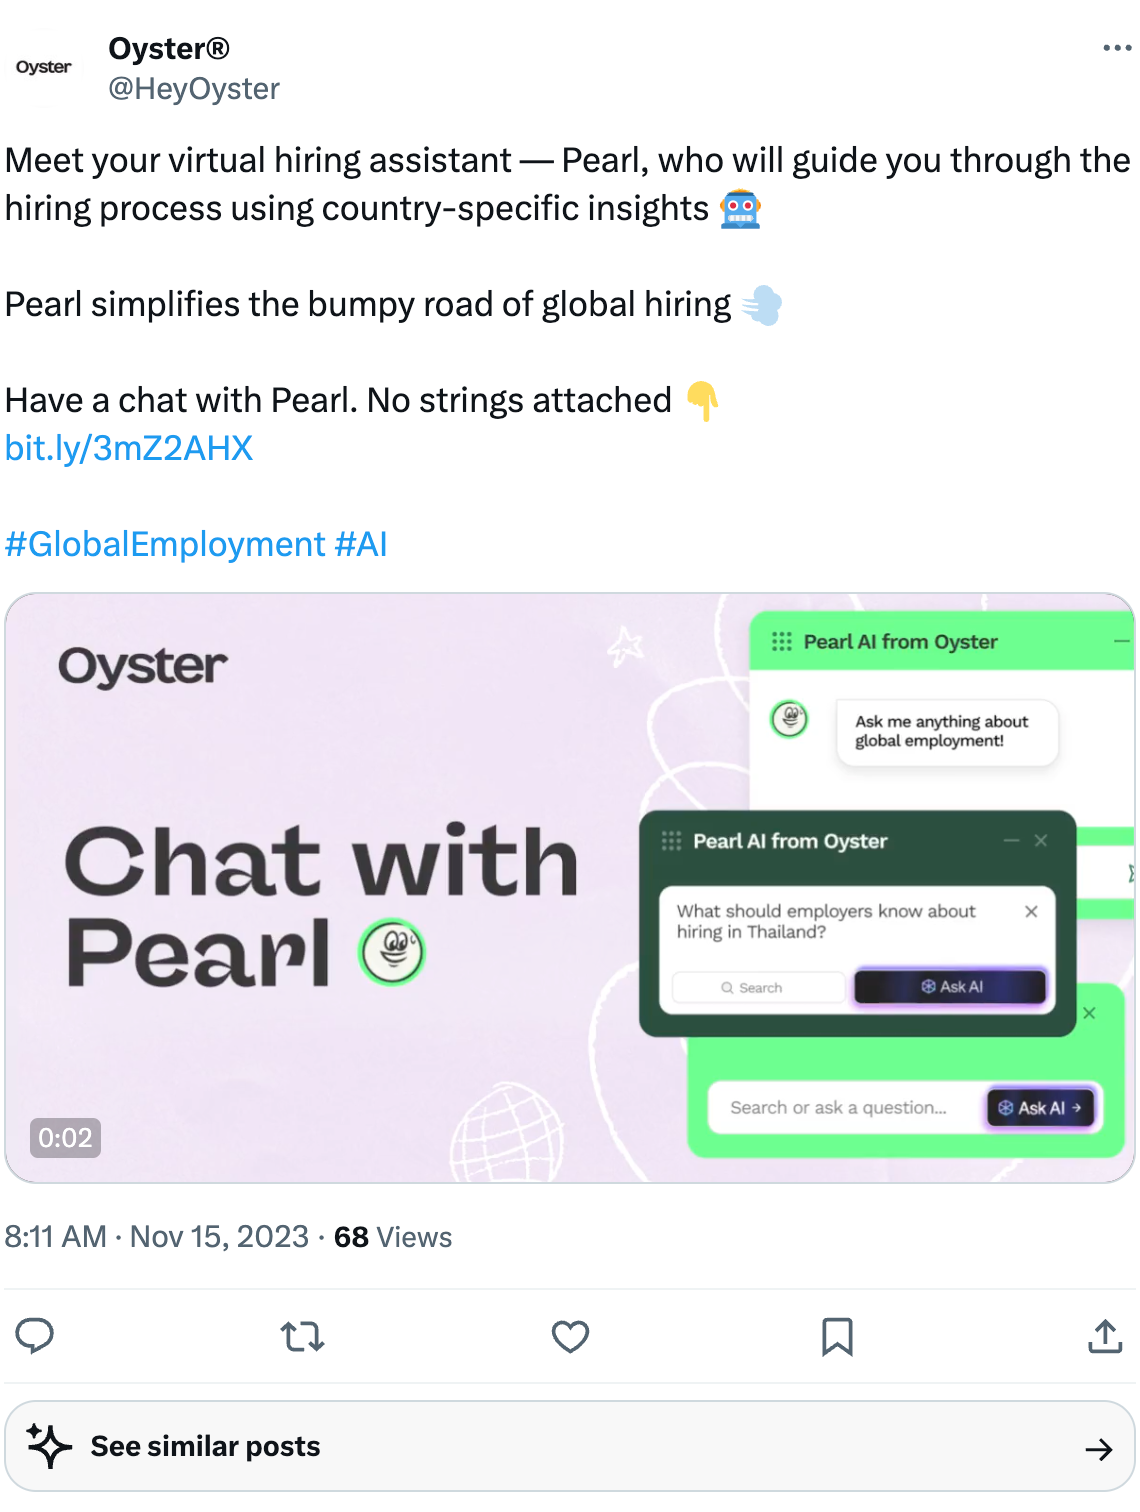 Oyster HR Social Media Post for AI announcement